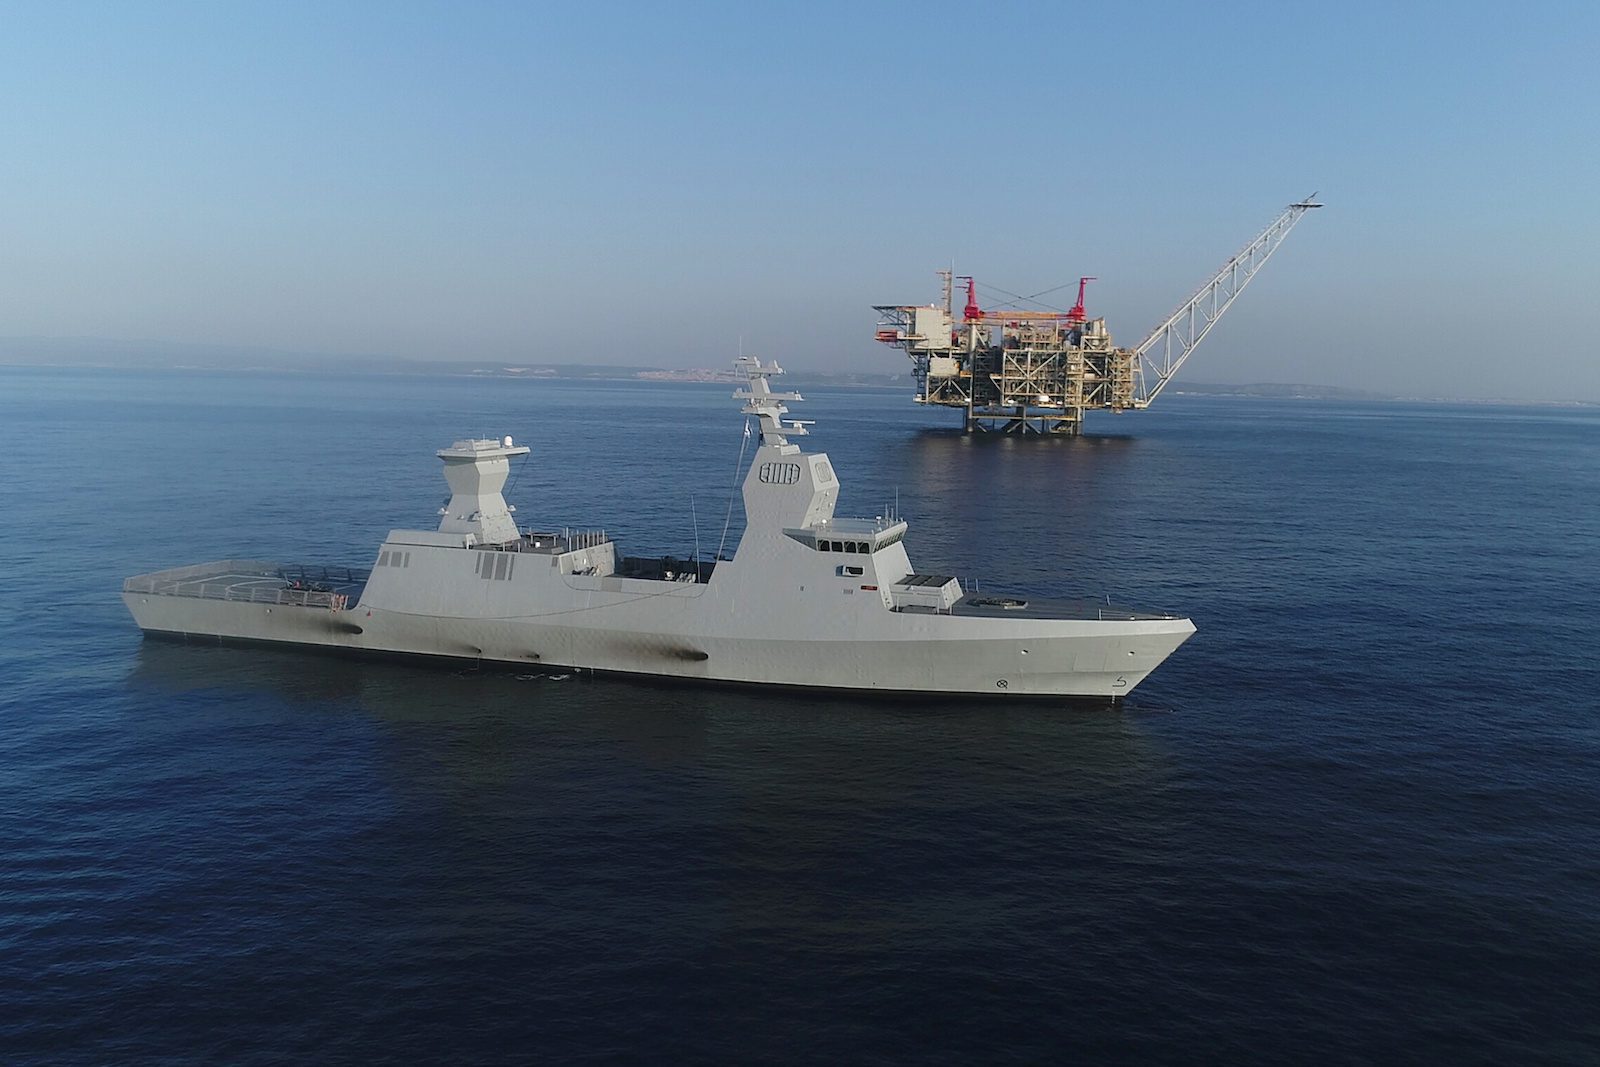 Israel Receives Its Most Advanced Warship as Iran Tensions Rise